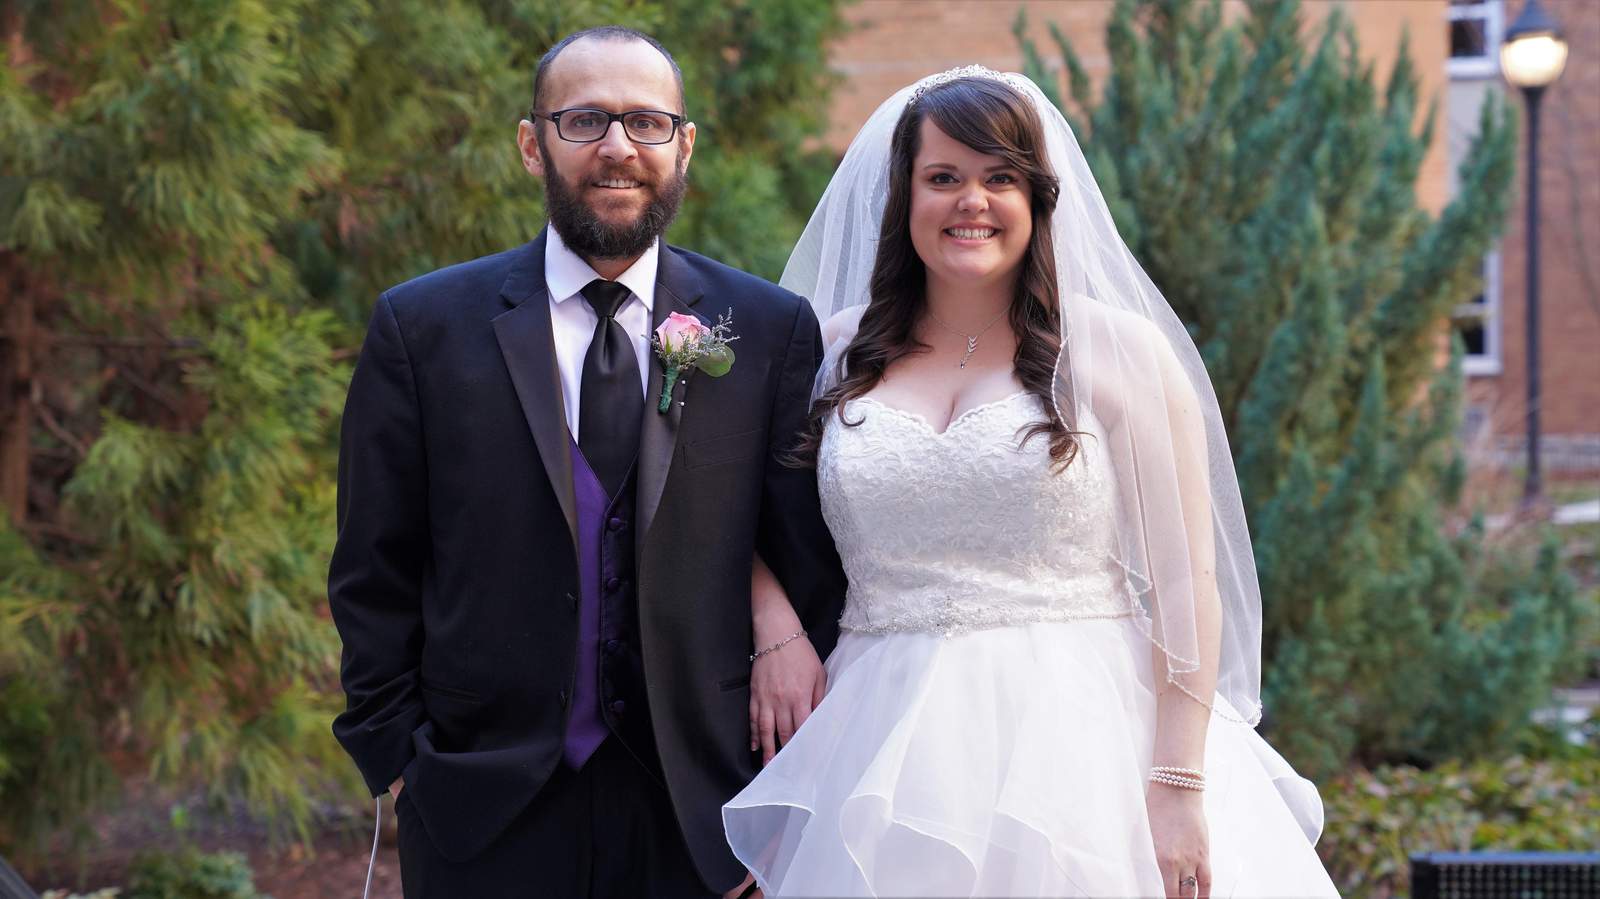 A hospital organized a wedding for a terminally ill patient